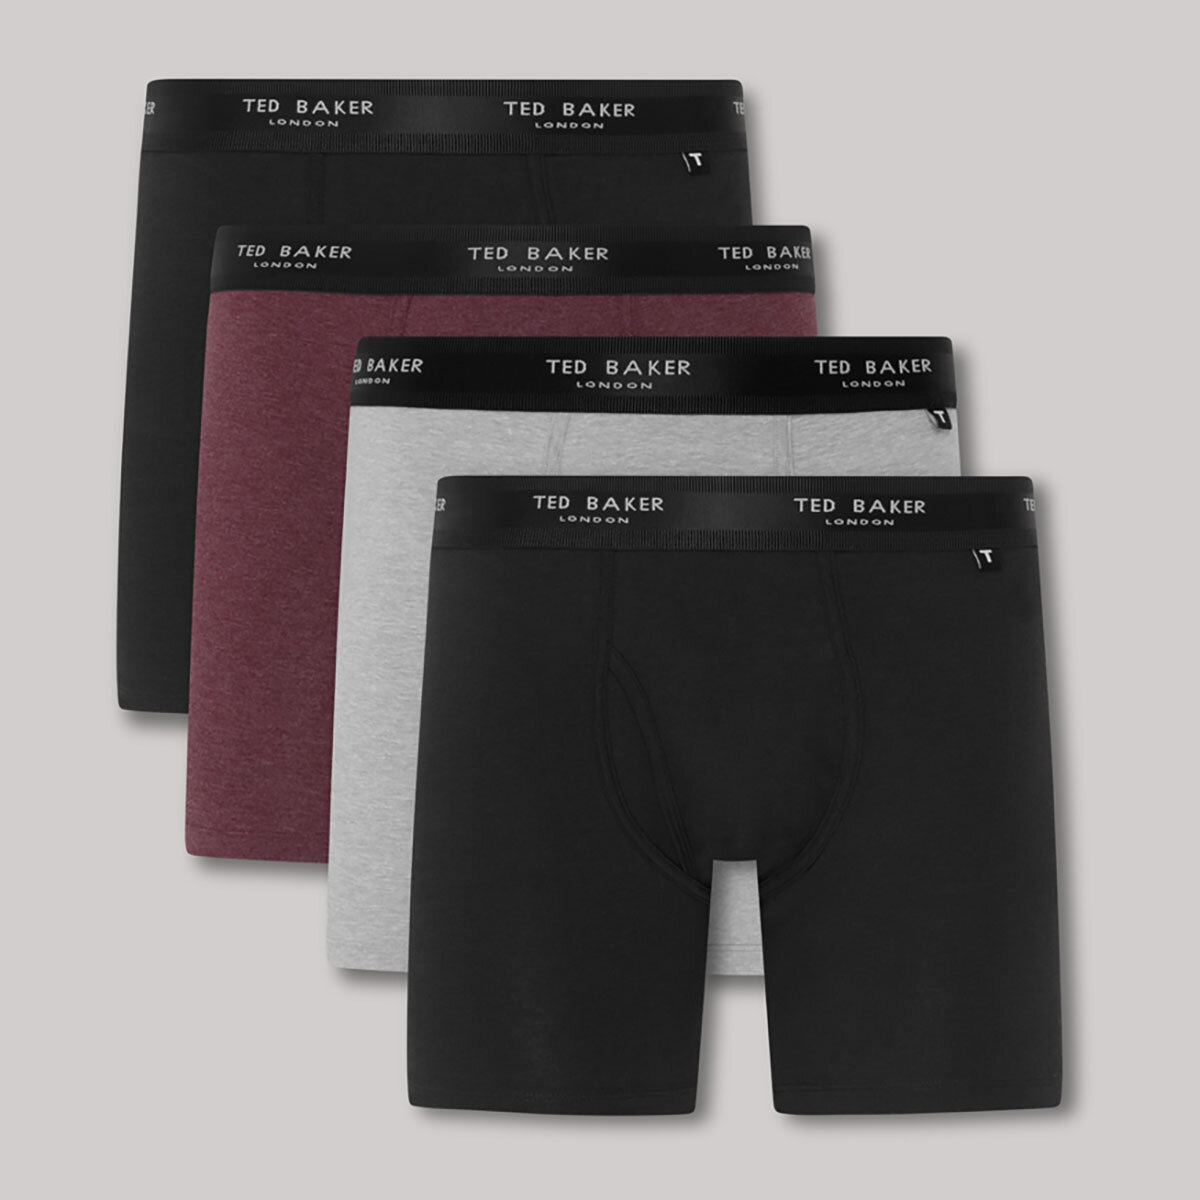 Ted Baker Men's Boxer Shorts, 4 Pack in 2 Colours and 3 S